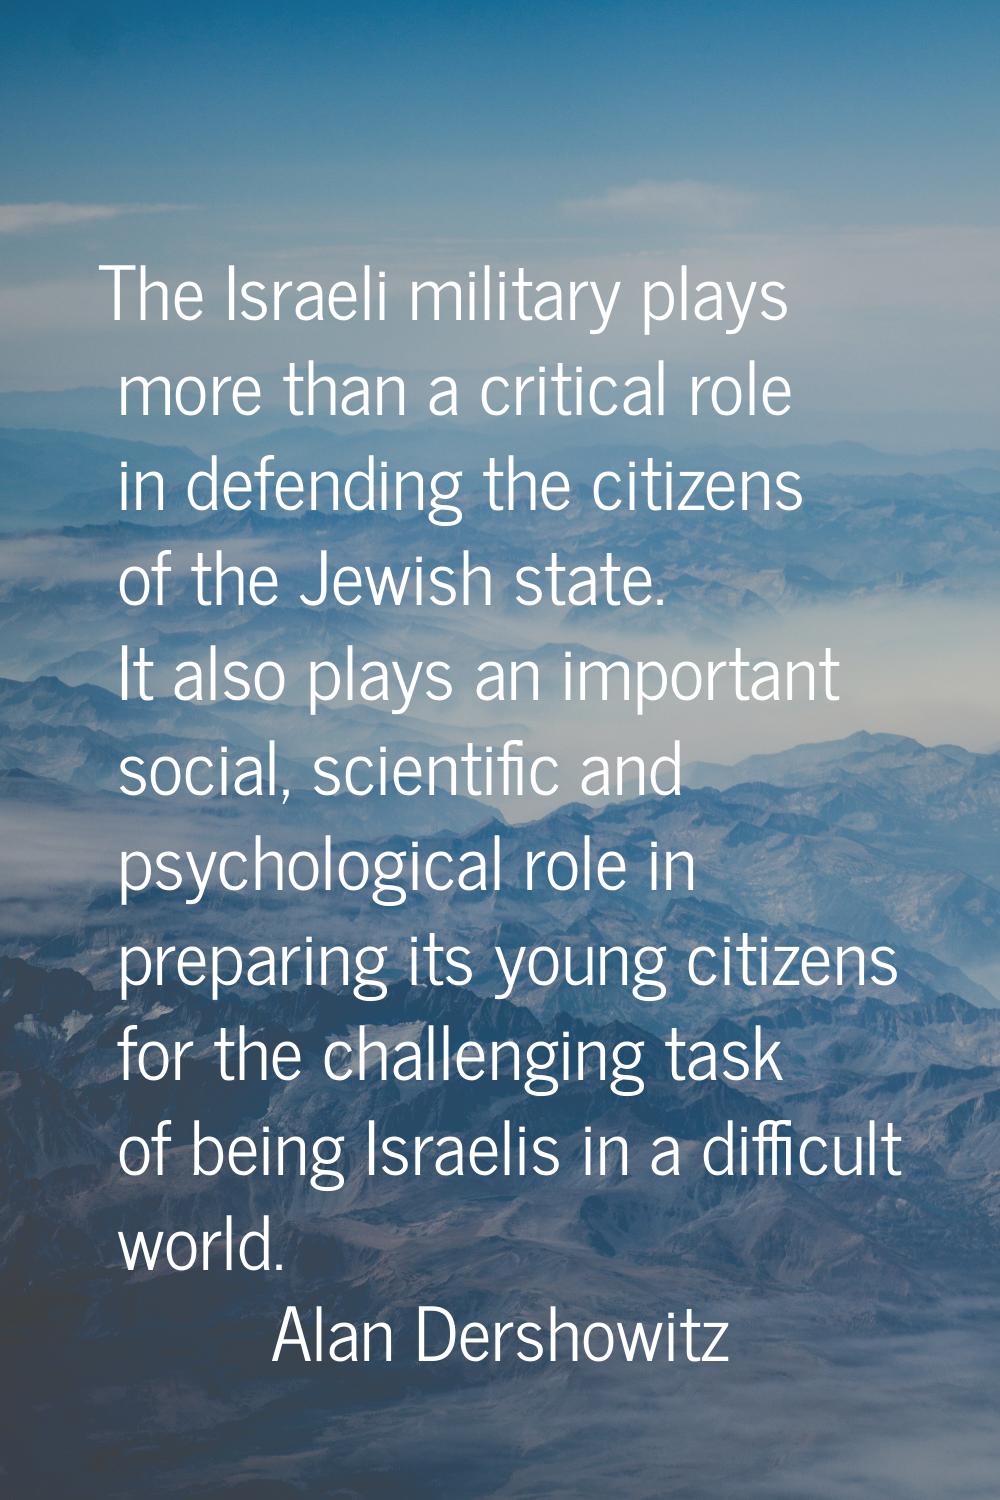 The Israeli military plays more than a critical role in defending the citizens of the Jewish state.